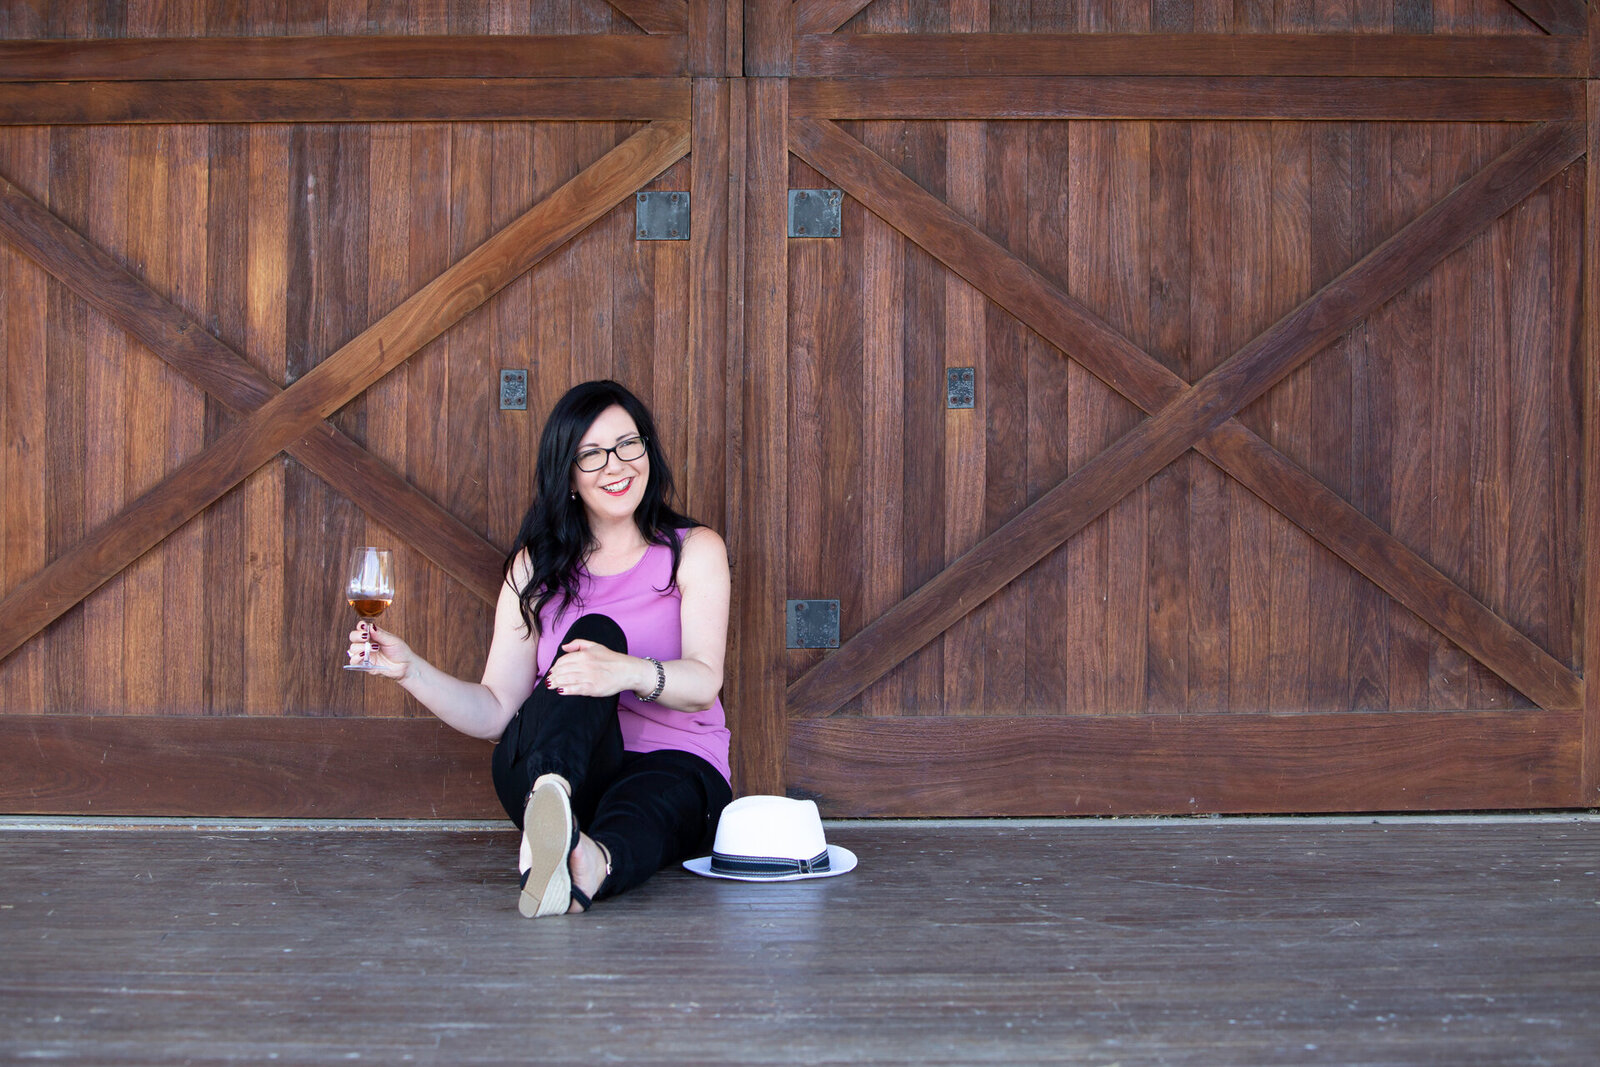 lady sitting on ground in front of barn doors hold a glass of wine